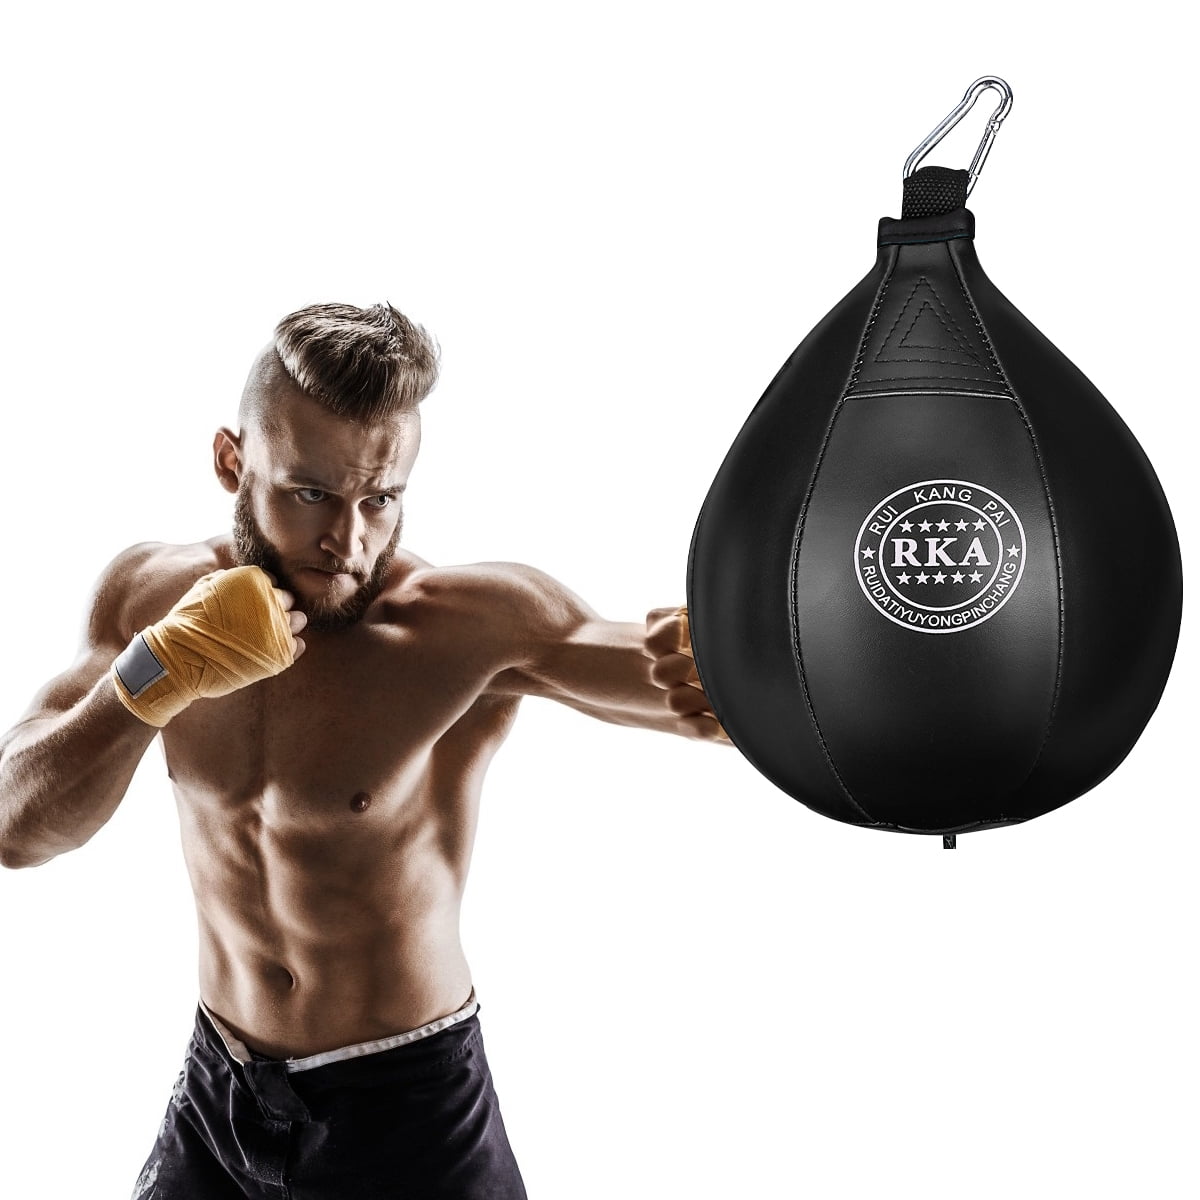 Kids Adults Reflex Speed Punching Bag for Relief Stress,Training Boxing Sports Red-Black Speed Bag Boxing Punching Bag Wall Mount Speed Ball Reflex Boxing Speed Bag with Spring 